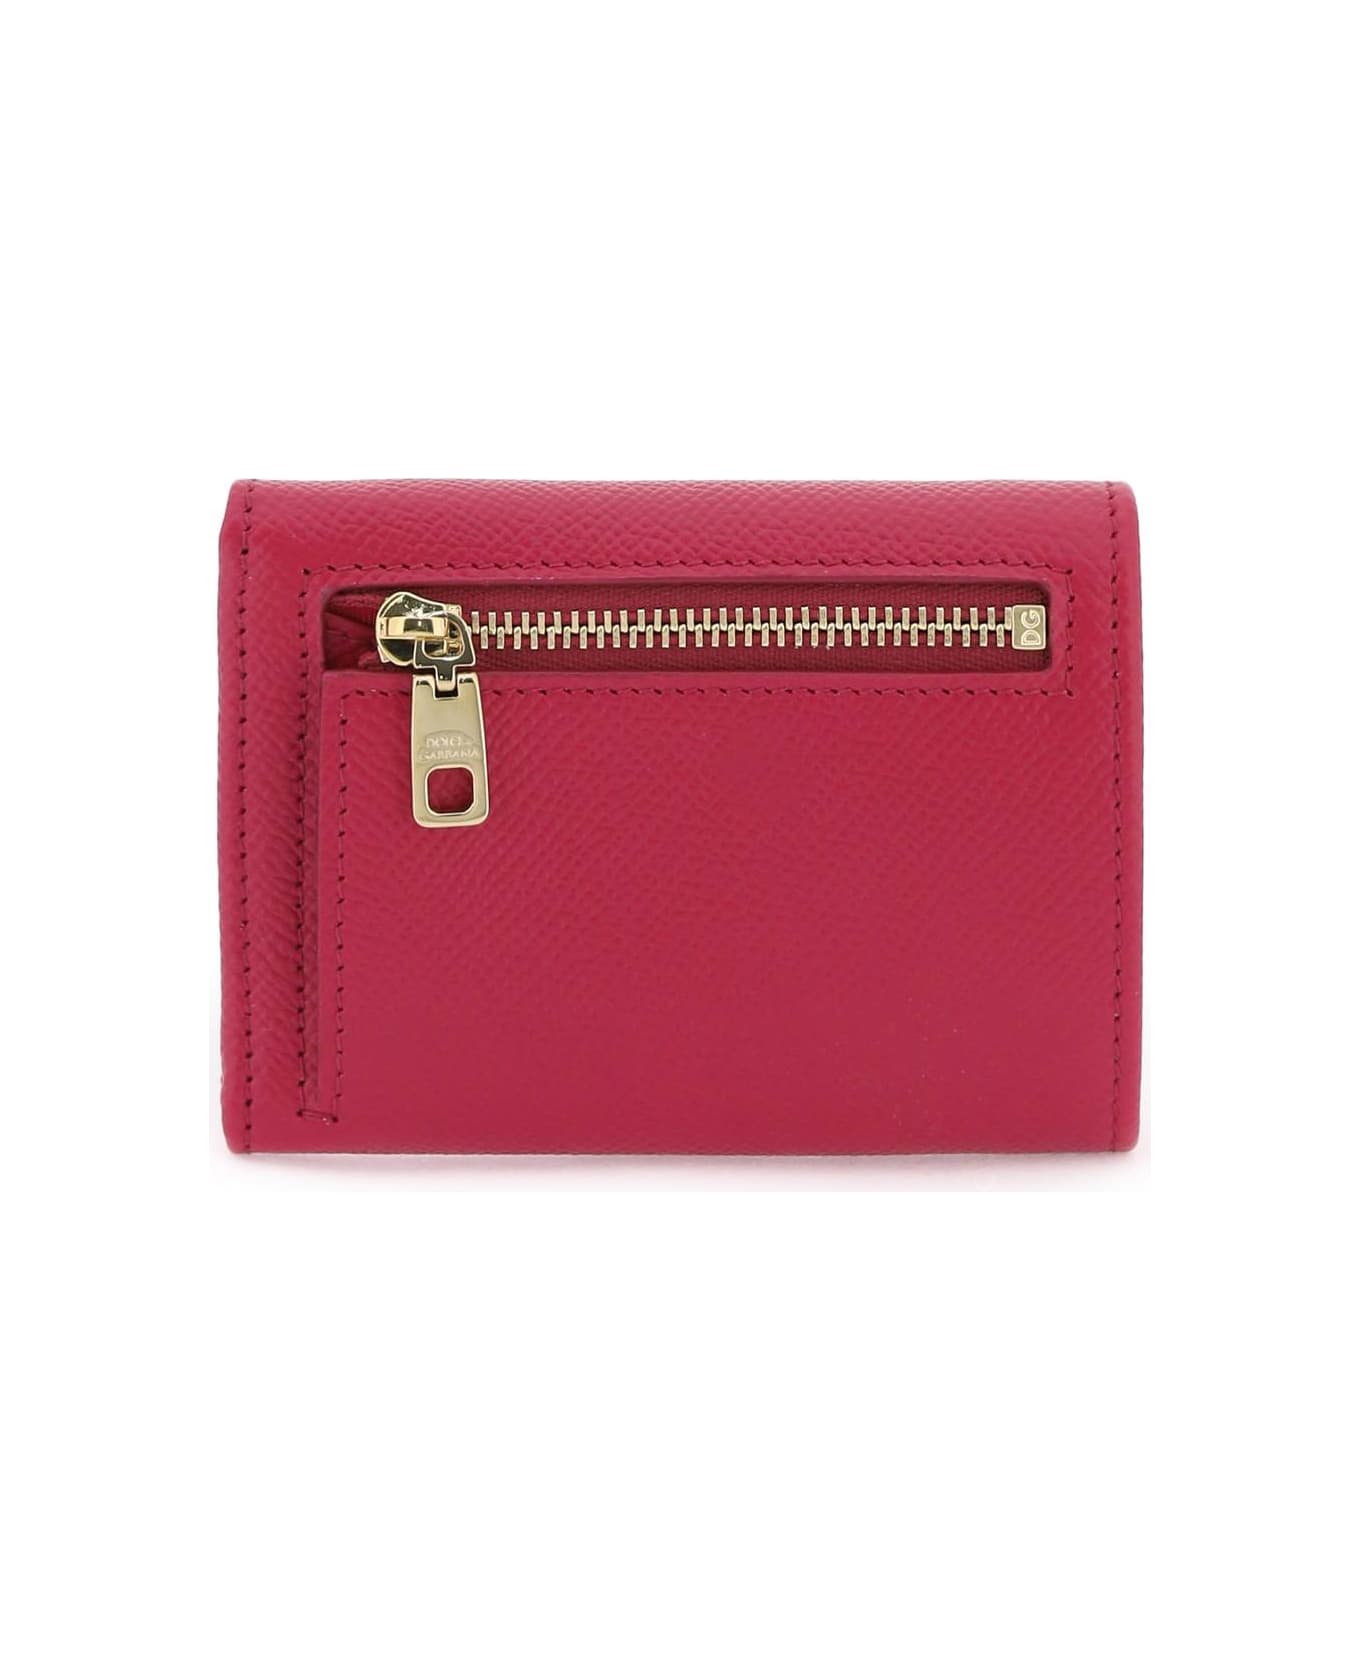 Dolce & Gabbana Leather Wallet - Pink